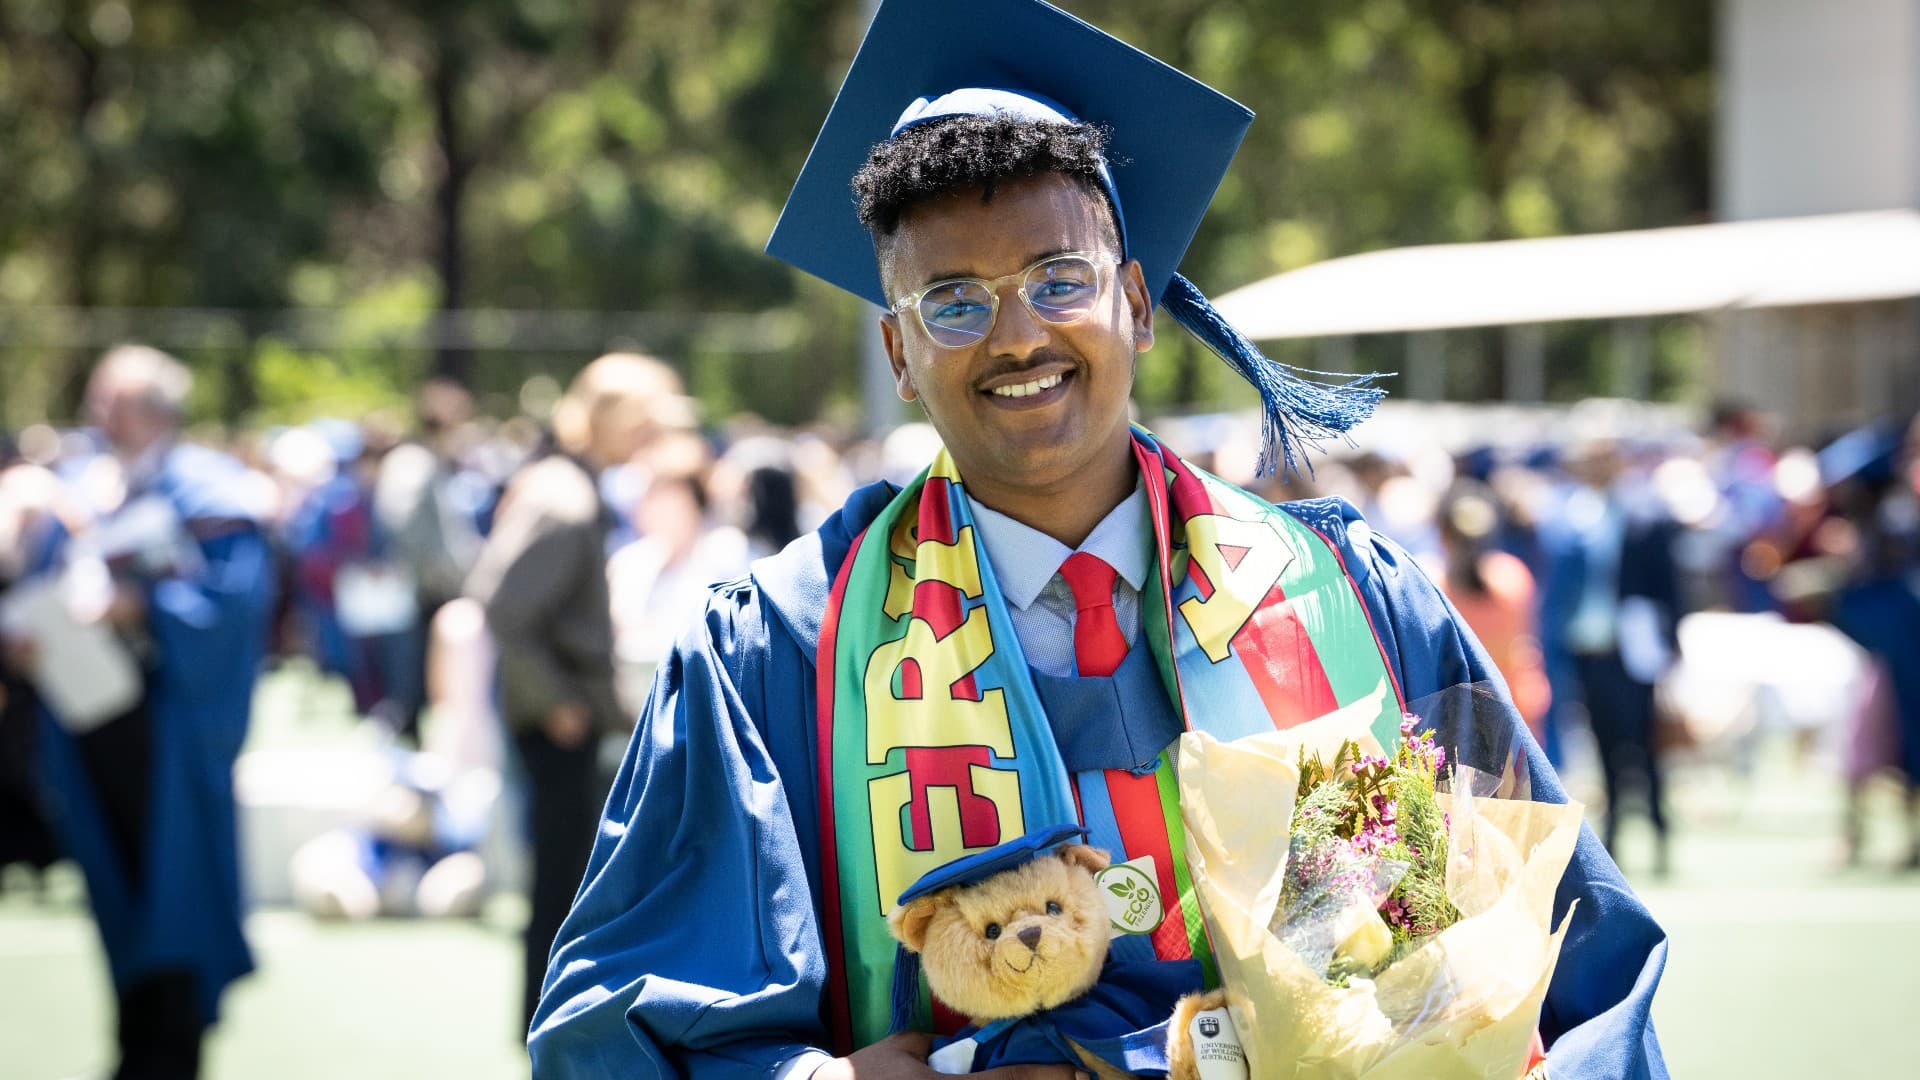 Teklemariam Mengistu wears the blue UOW graduation gown and cap, with a flag of Eritrea drapped around his neck. He holds a teddy bear and bunch of flowers and is smiling at the camera. Photo: Paul Jones